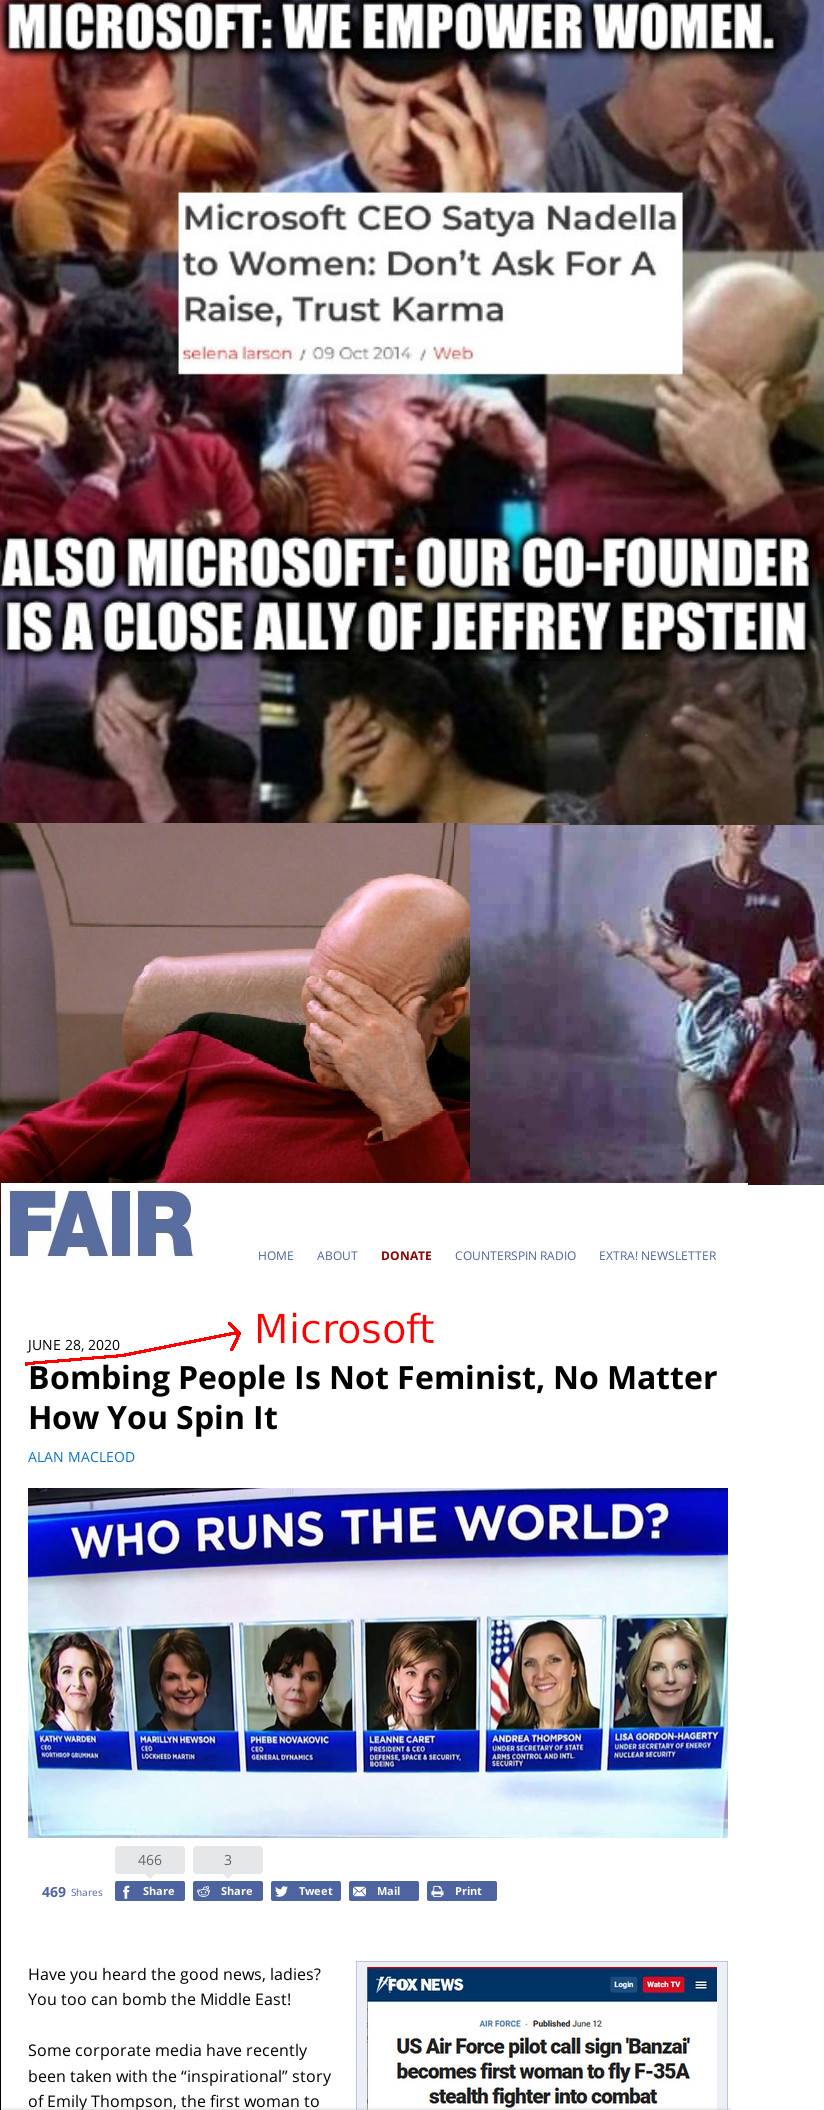 Star Trek face palm: Microsoft: we empower women. Also Microsoft: our co-founder is a close ally of Jeffrey Epstein